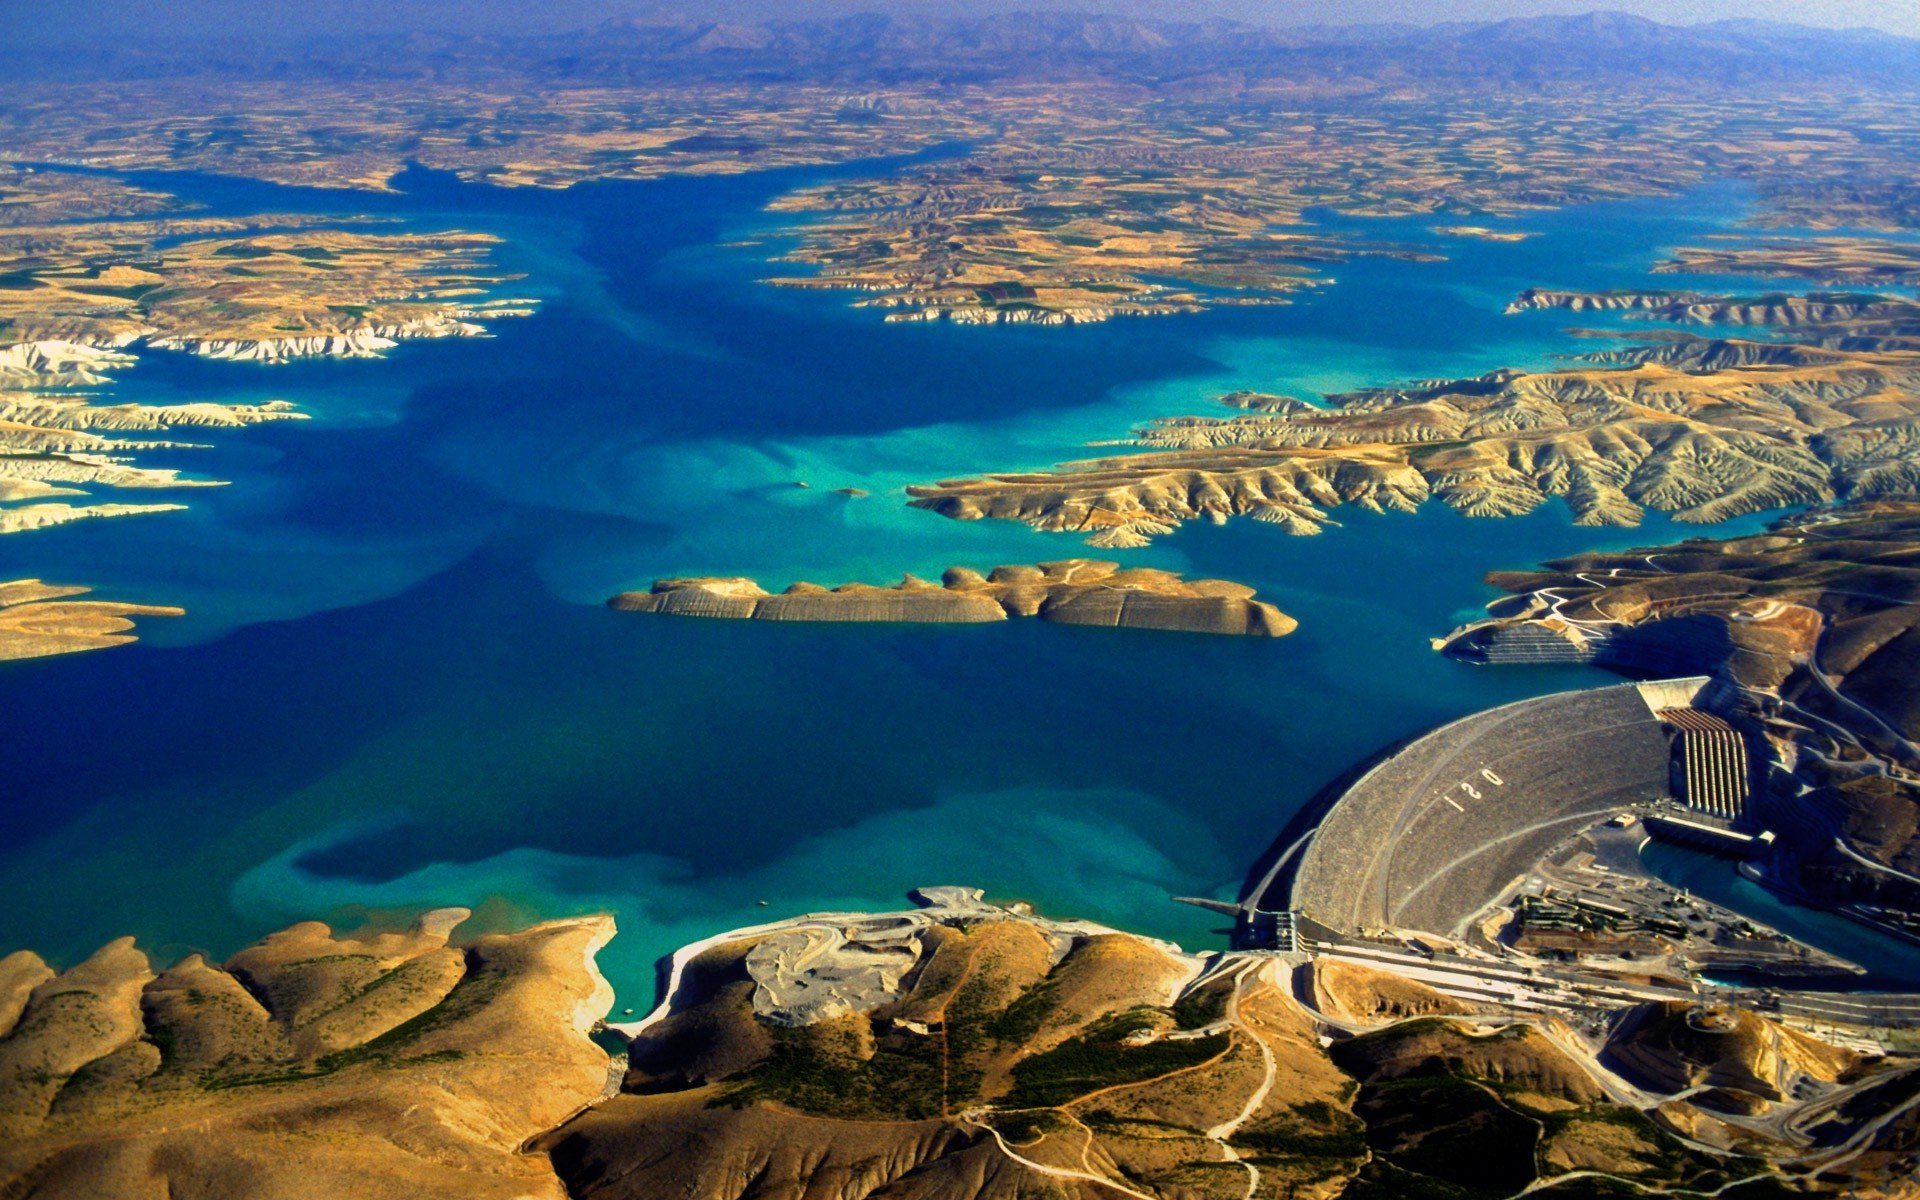 aerial, View, Blue, Dam, Hill, Lake, Landscape, Nature, Panoramas, Turkey, Water, Erial, View, Of, The, Ataturk, Dam, On, The, Euphrates, River, Turkey Wallpaper